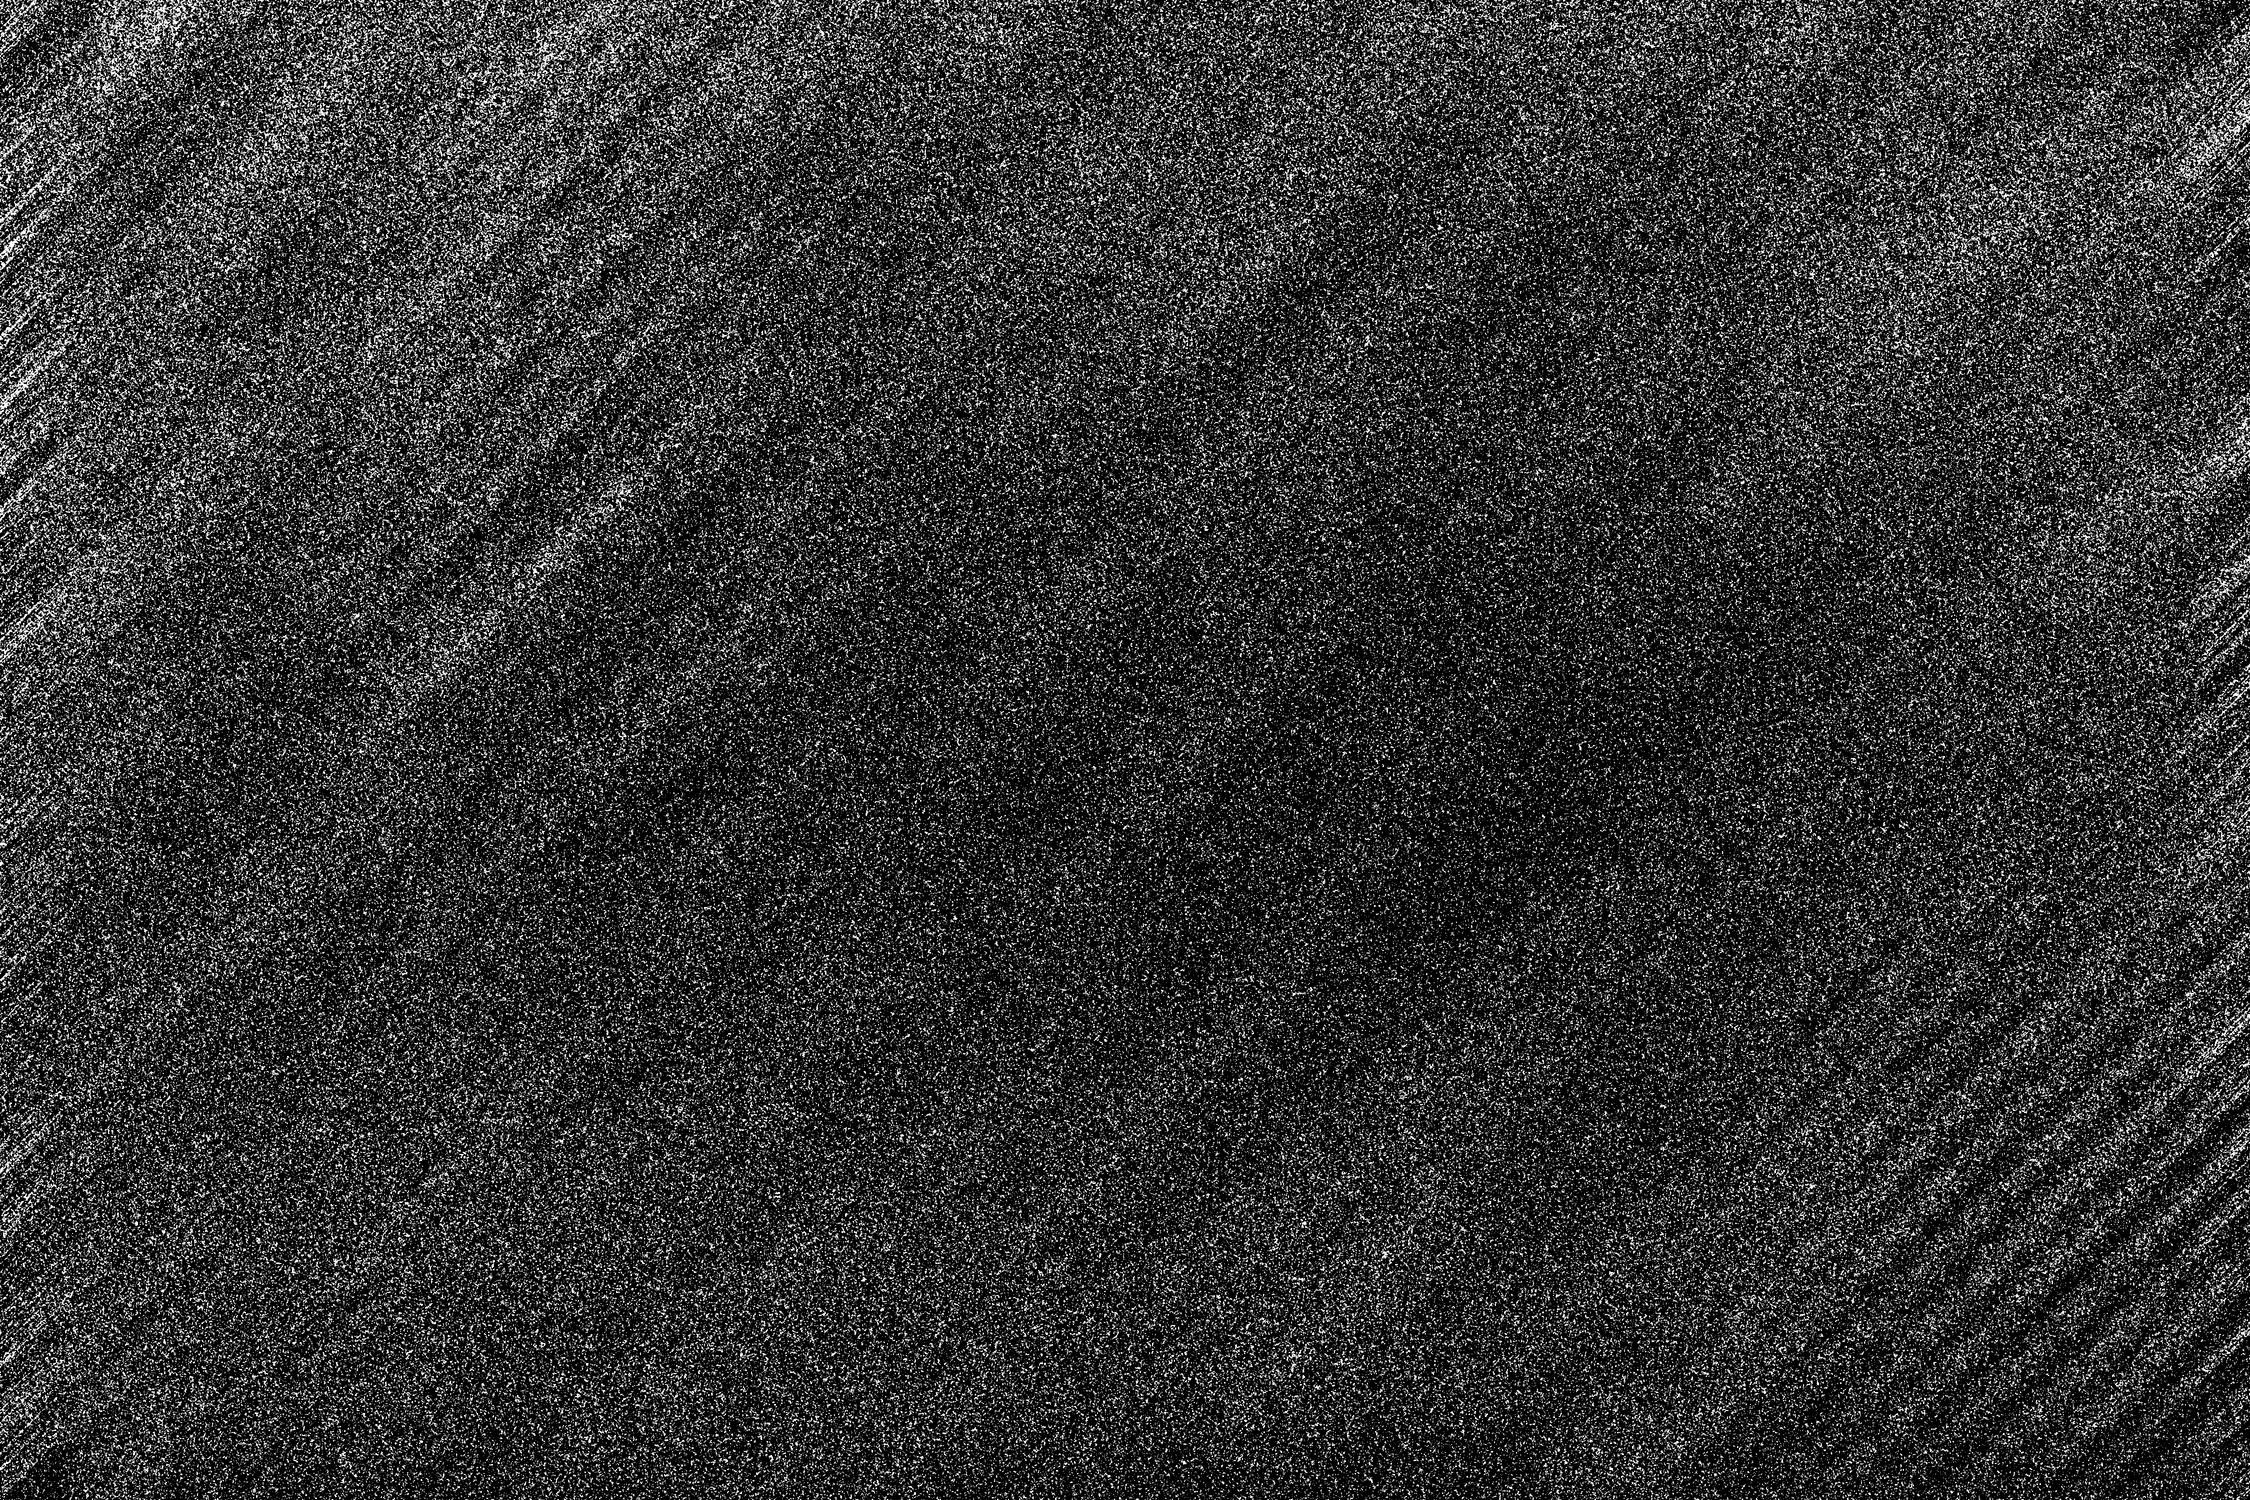 An abstract black and white grainy grunge texture background ima